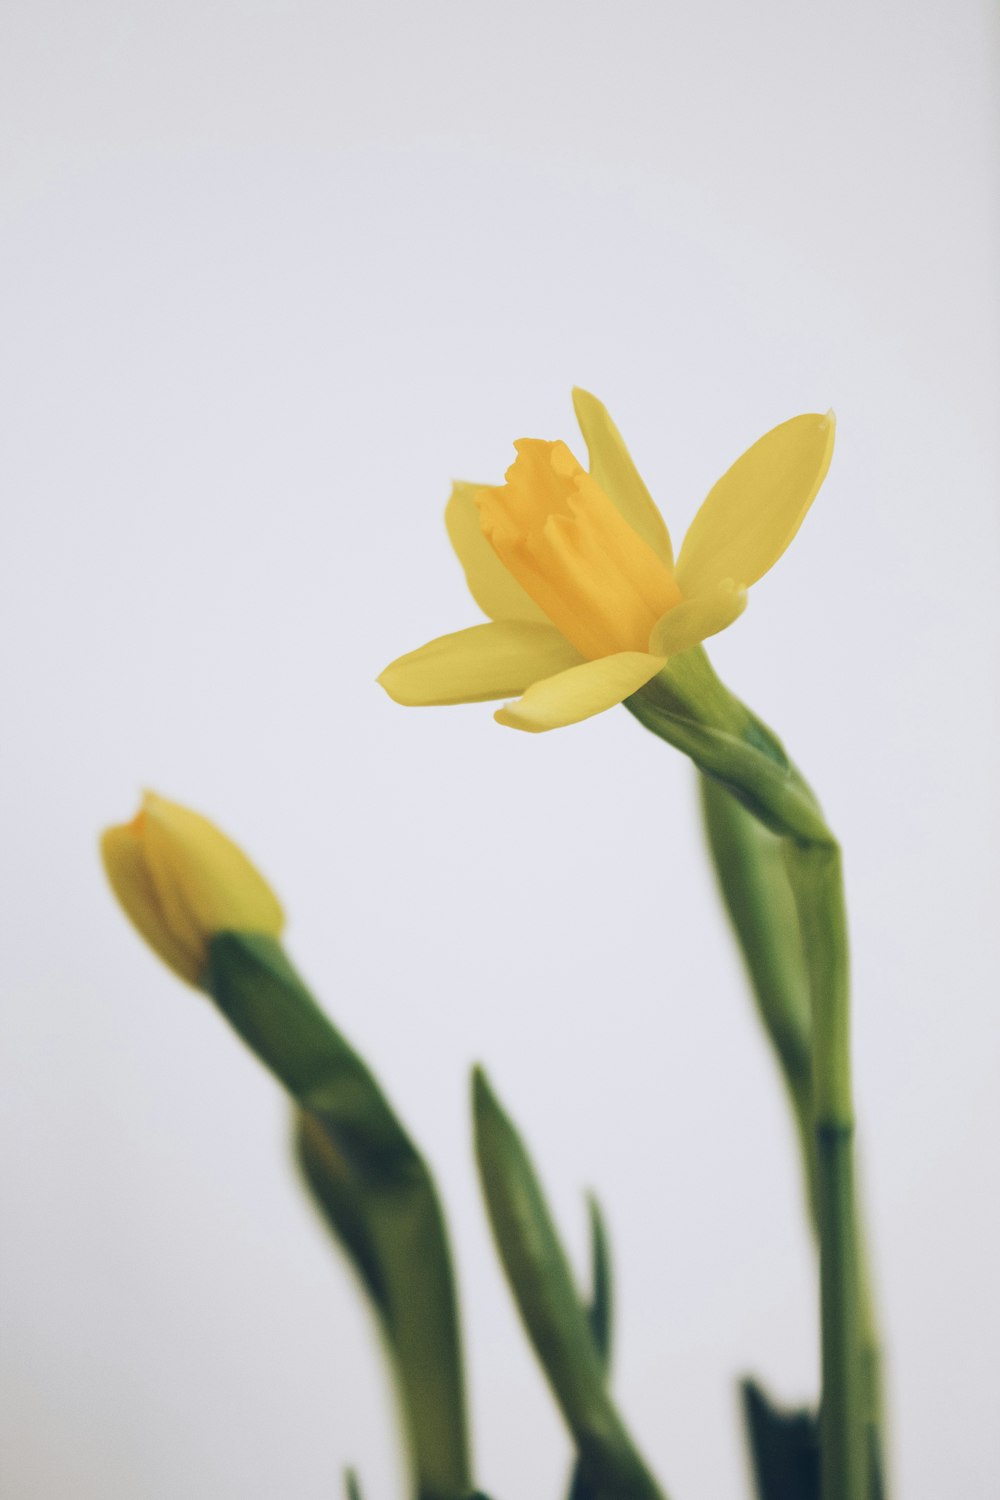 a close up of two yellow flowers in a vase